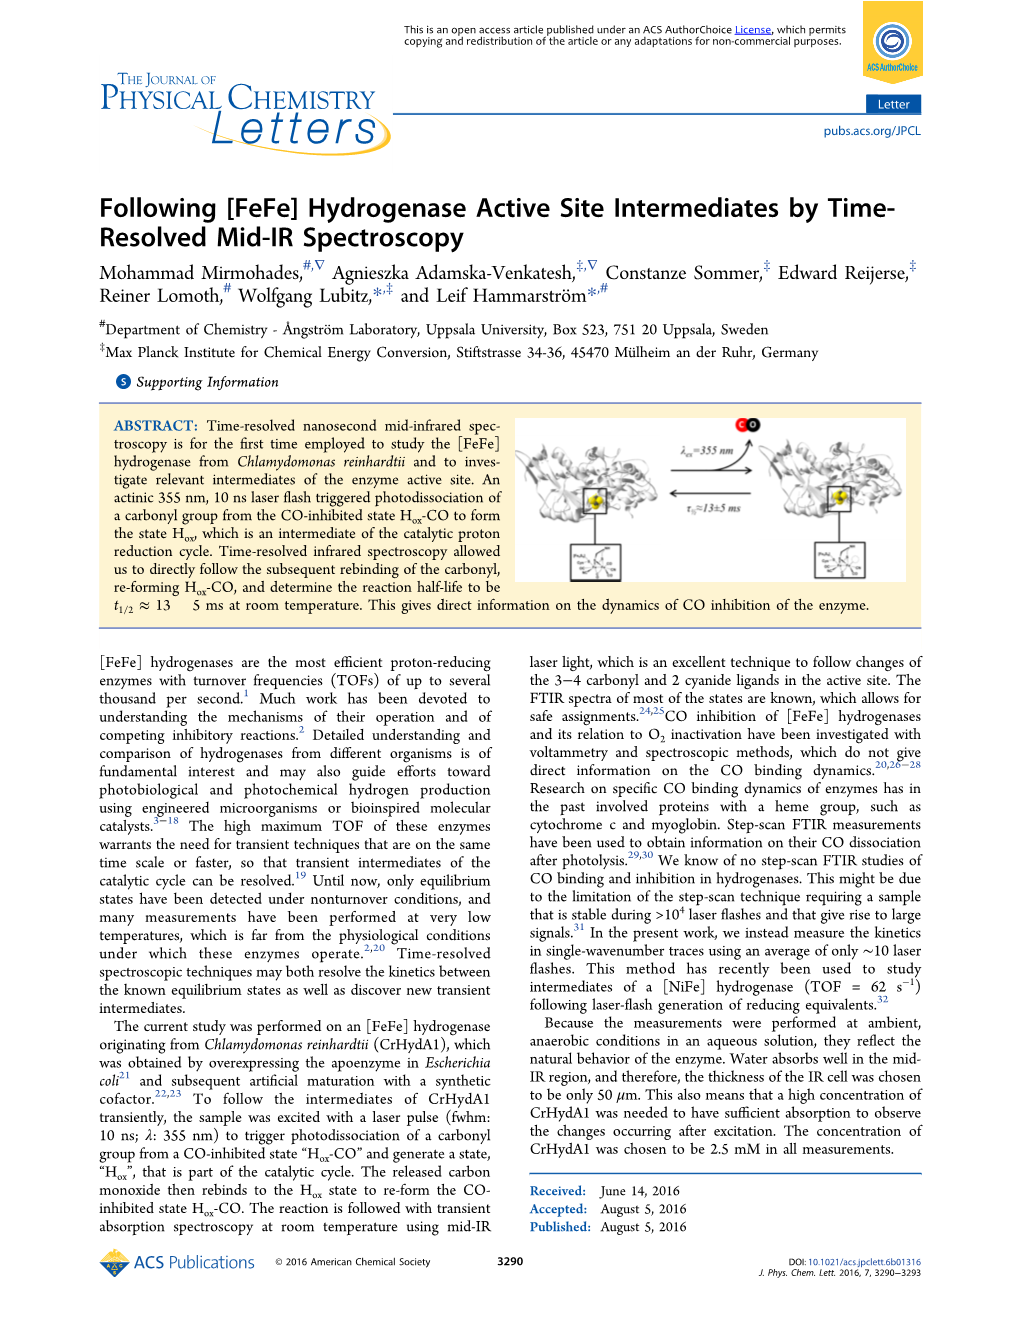 Following [Fefe] Hydrogenase Active Site Intermediates by Time